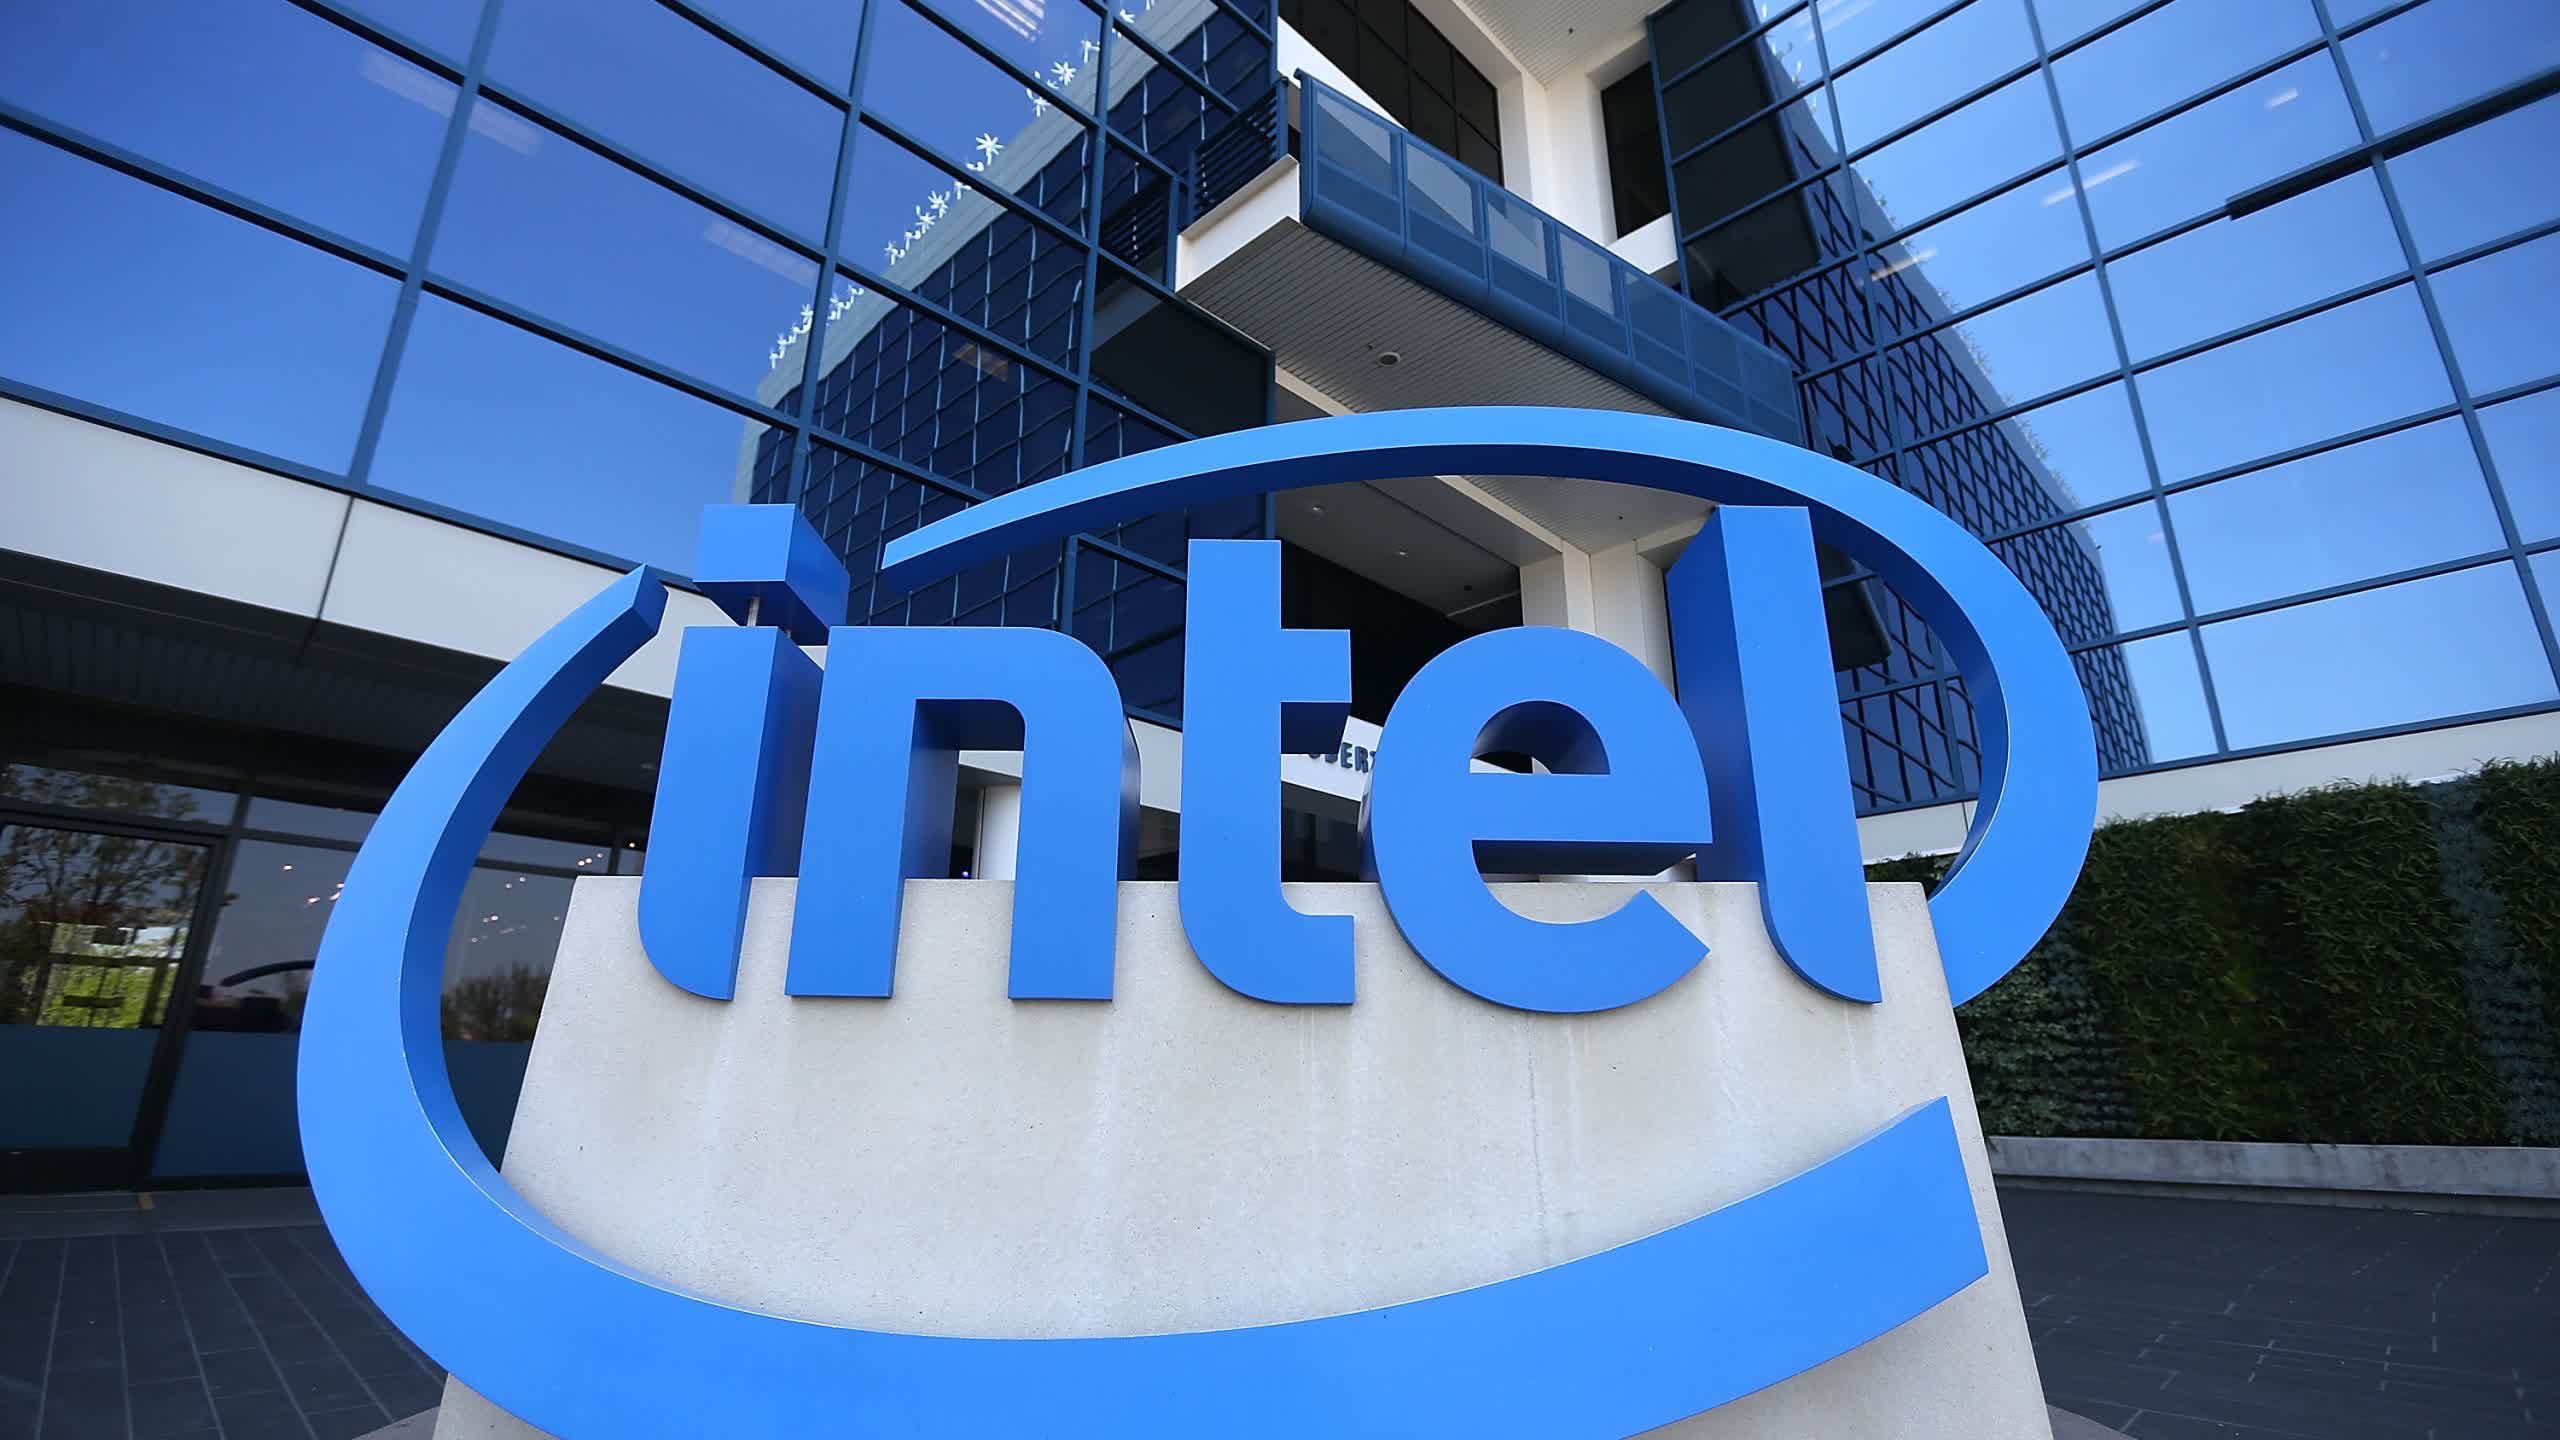 Some Intel software can be downloaded in Russia again because of warranty obligations